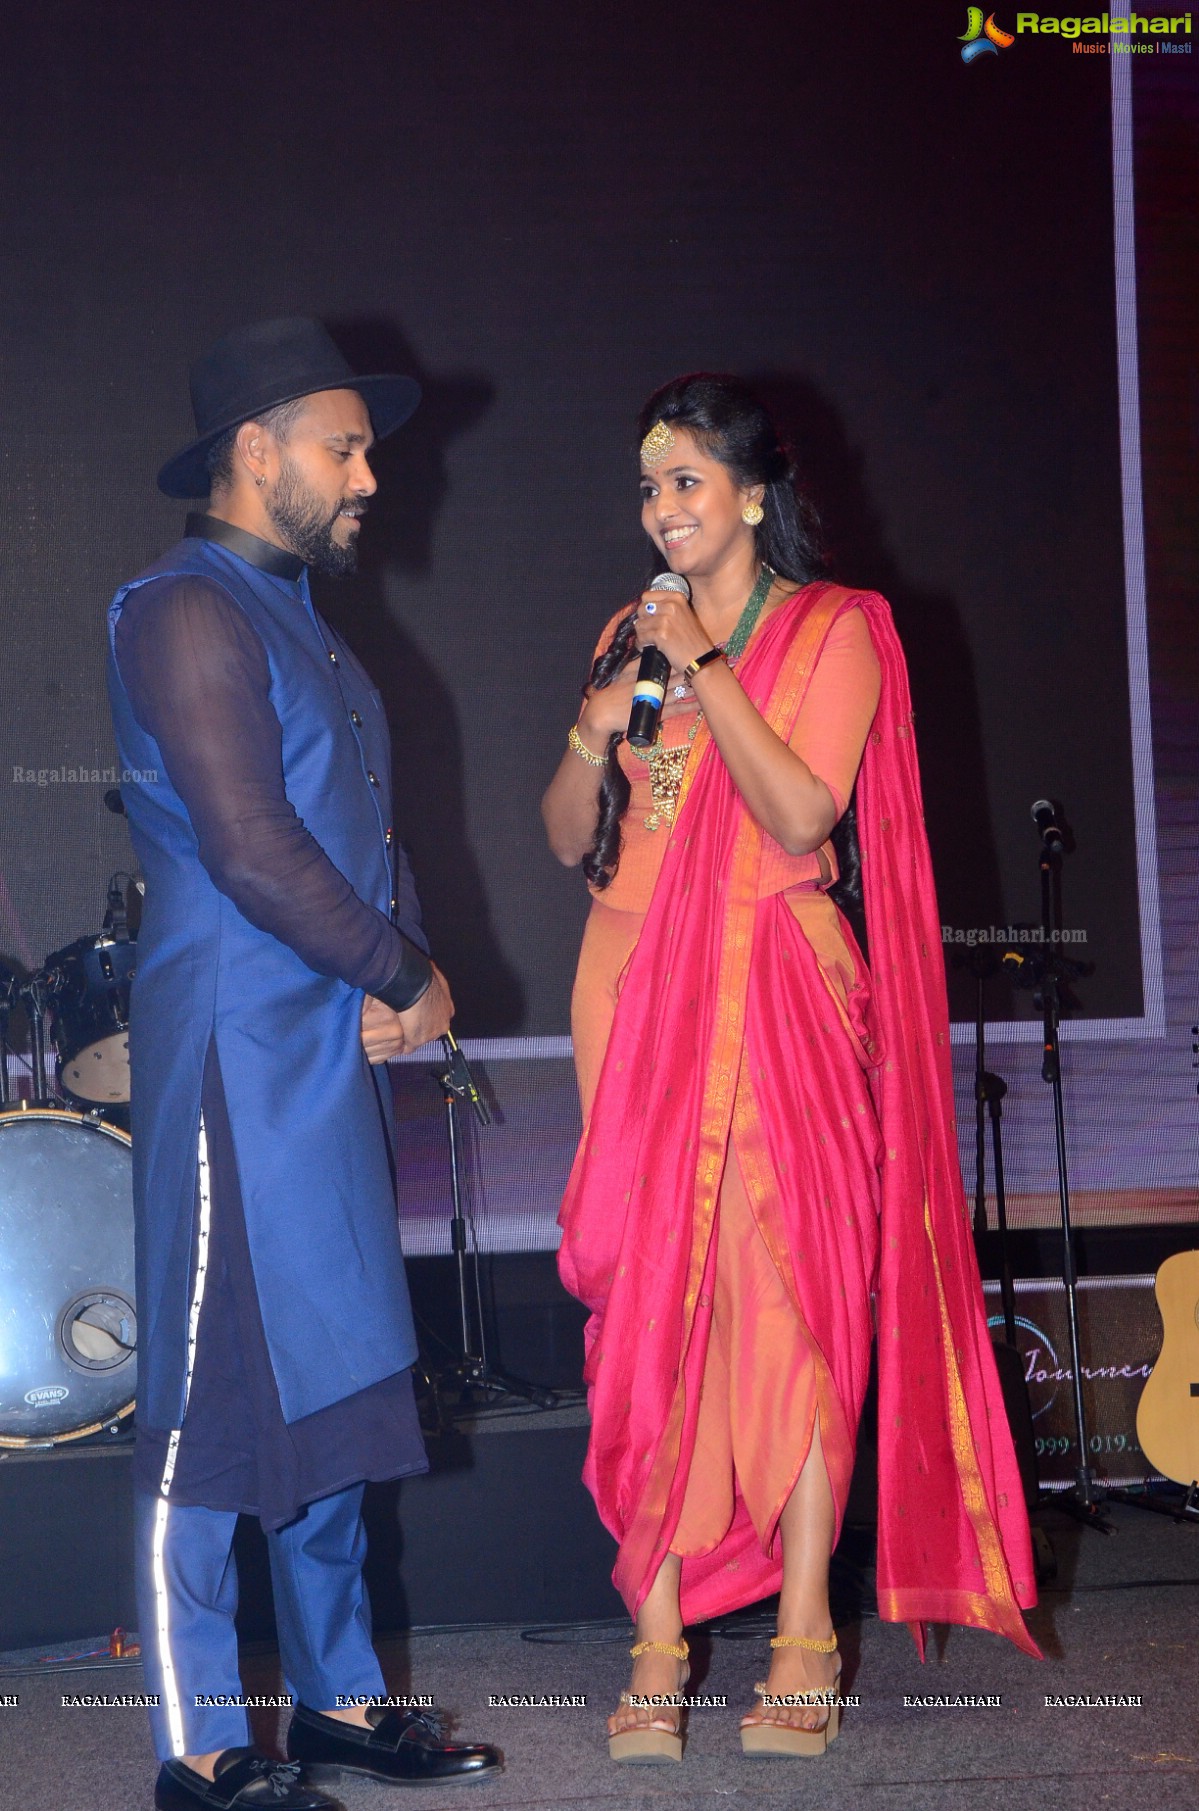 A Journey 1999-2019 - Smitha Live Concert at JRC Conention